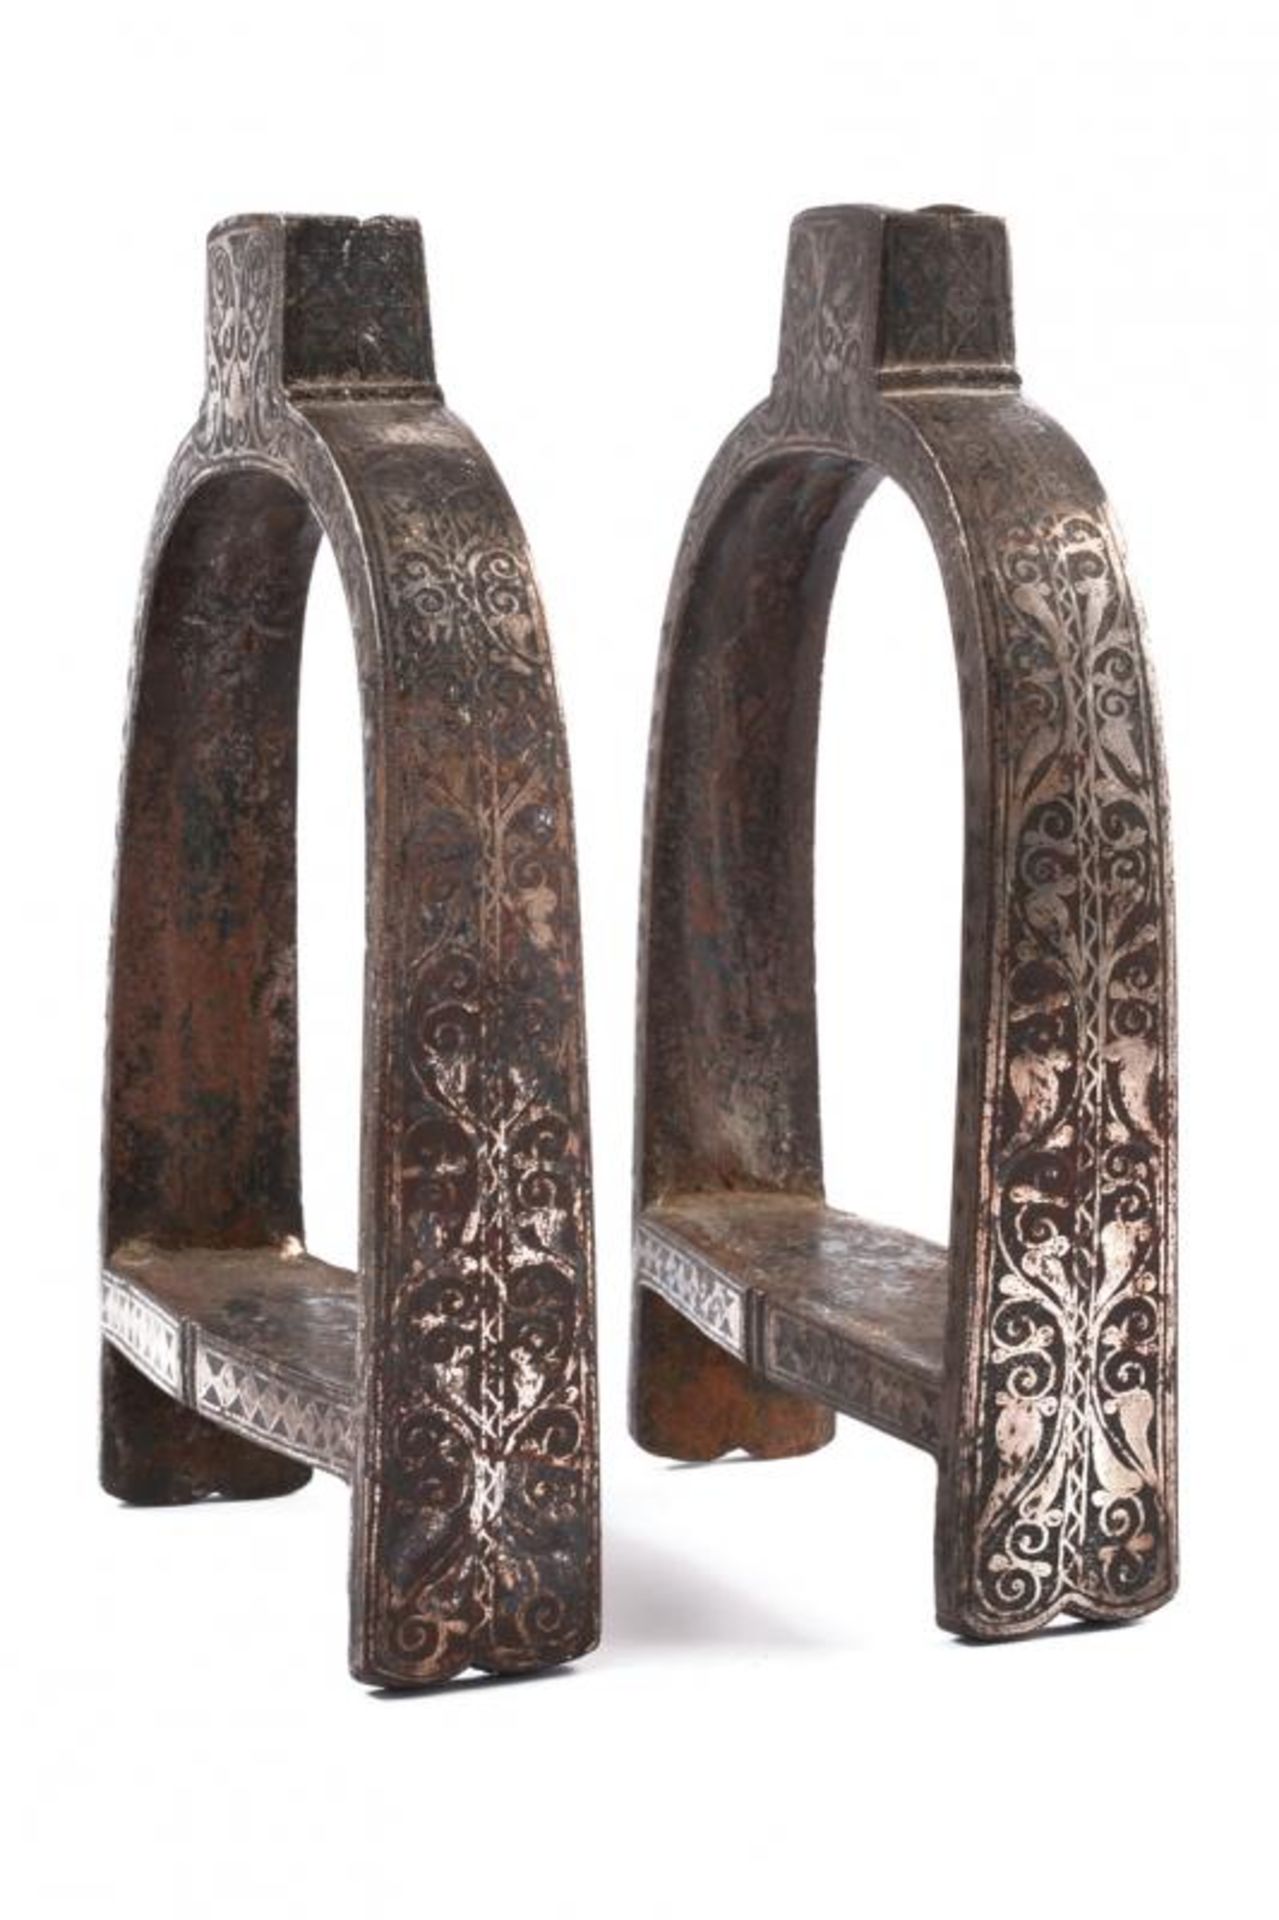 A rare pair of silver decorated stirrups